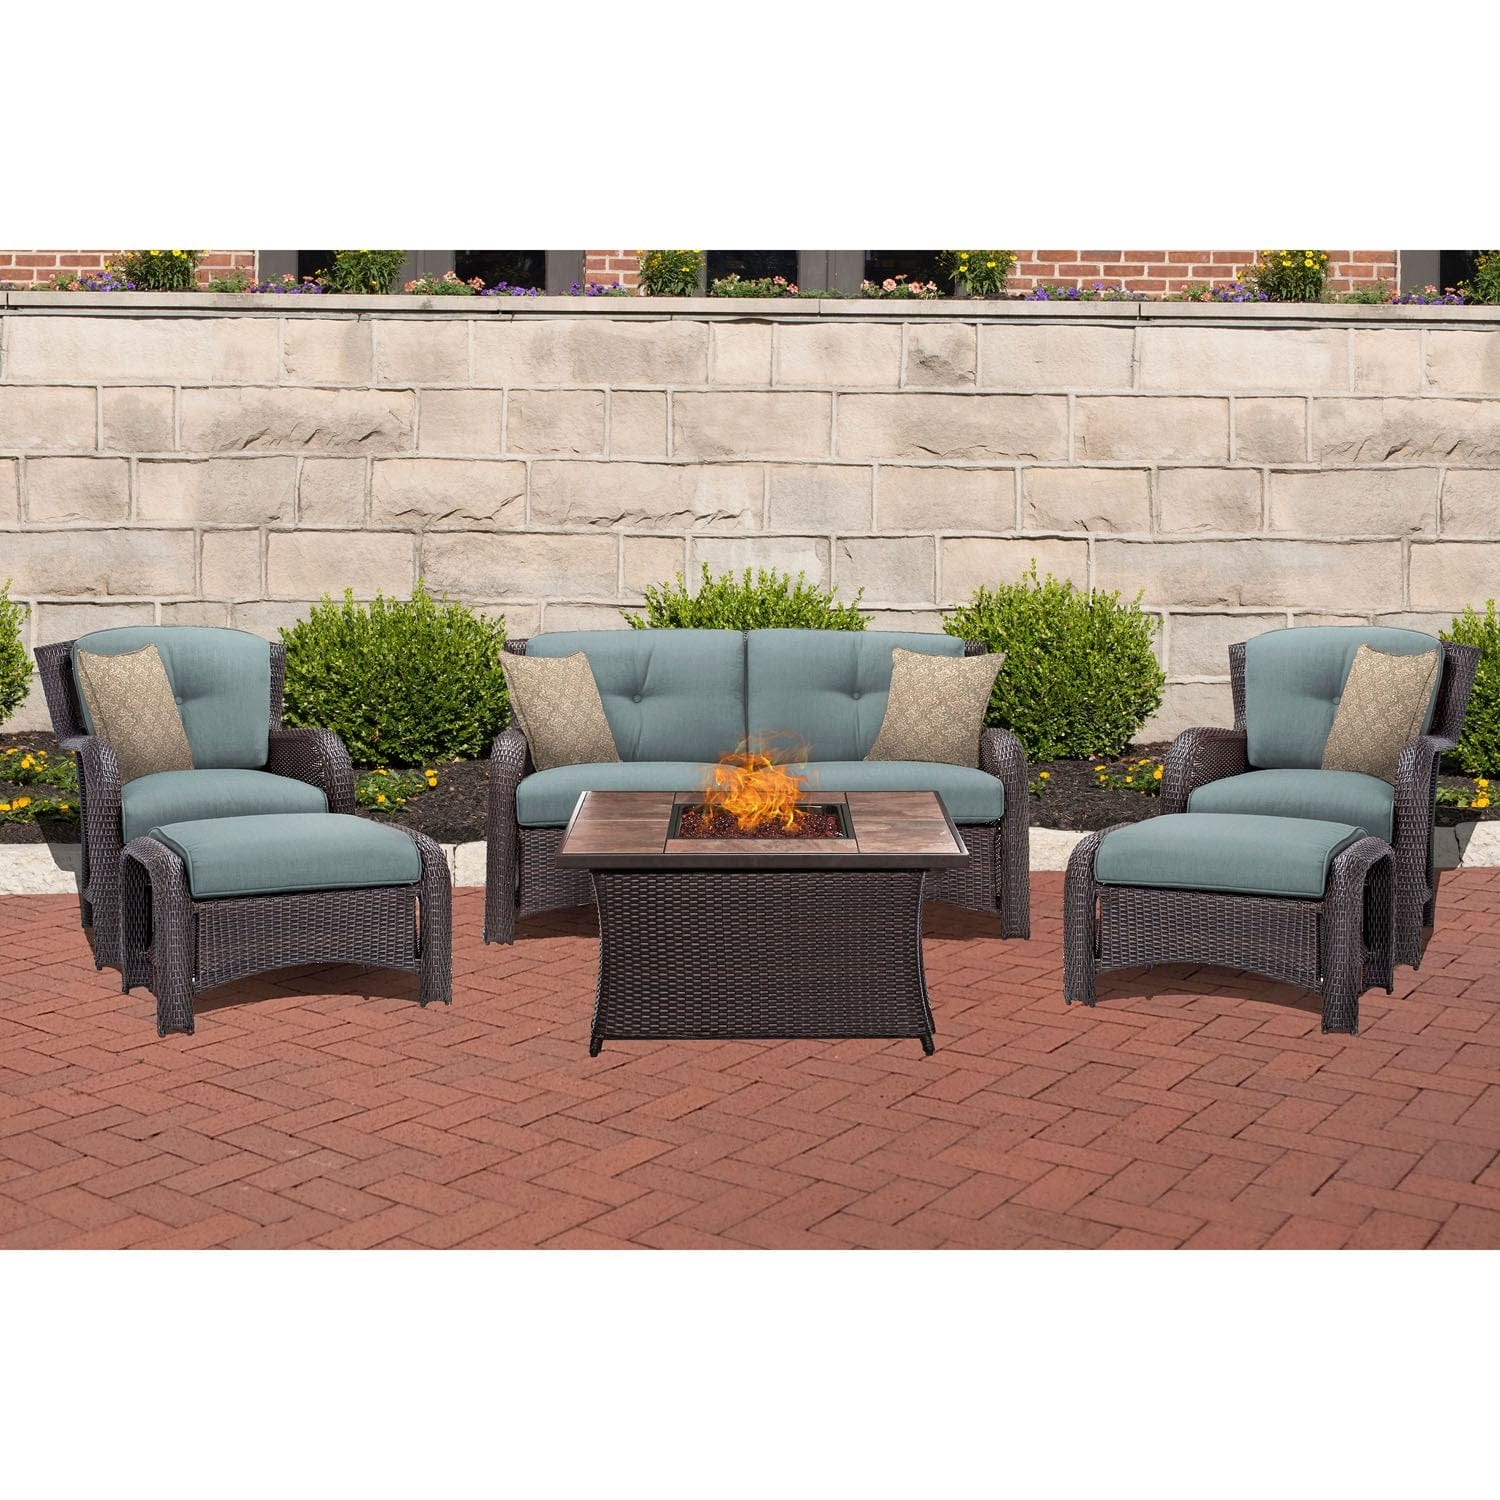 Hanover Fire Pit Chat Set Hanover Strathmere 6-Piece Lounge Set In Ocean Blue with Fire Pit Table | 36x44 | STRATH6PCFP-BLU-TN